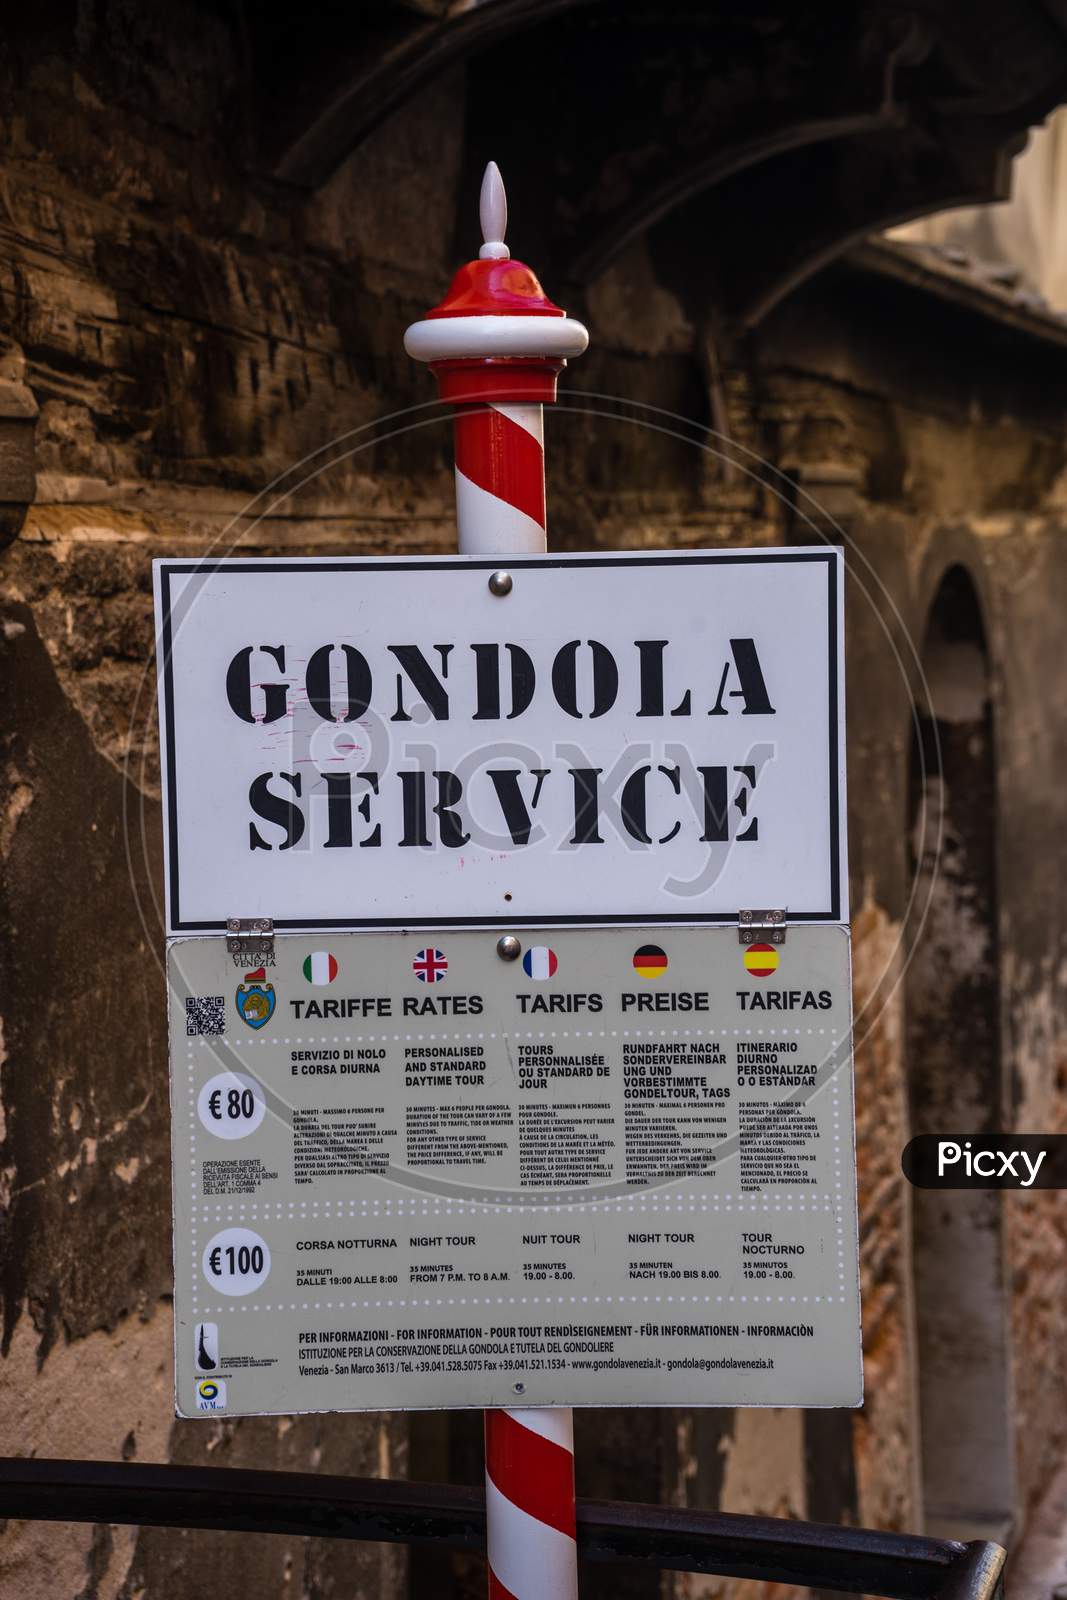 Venice, Italy - 30 June 2018: The Details Of The Price For Gondola Service In Venice, Italy